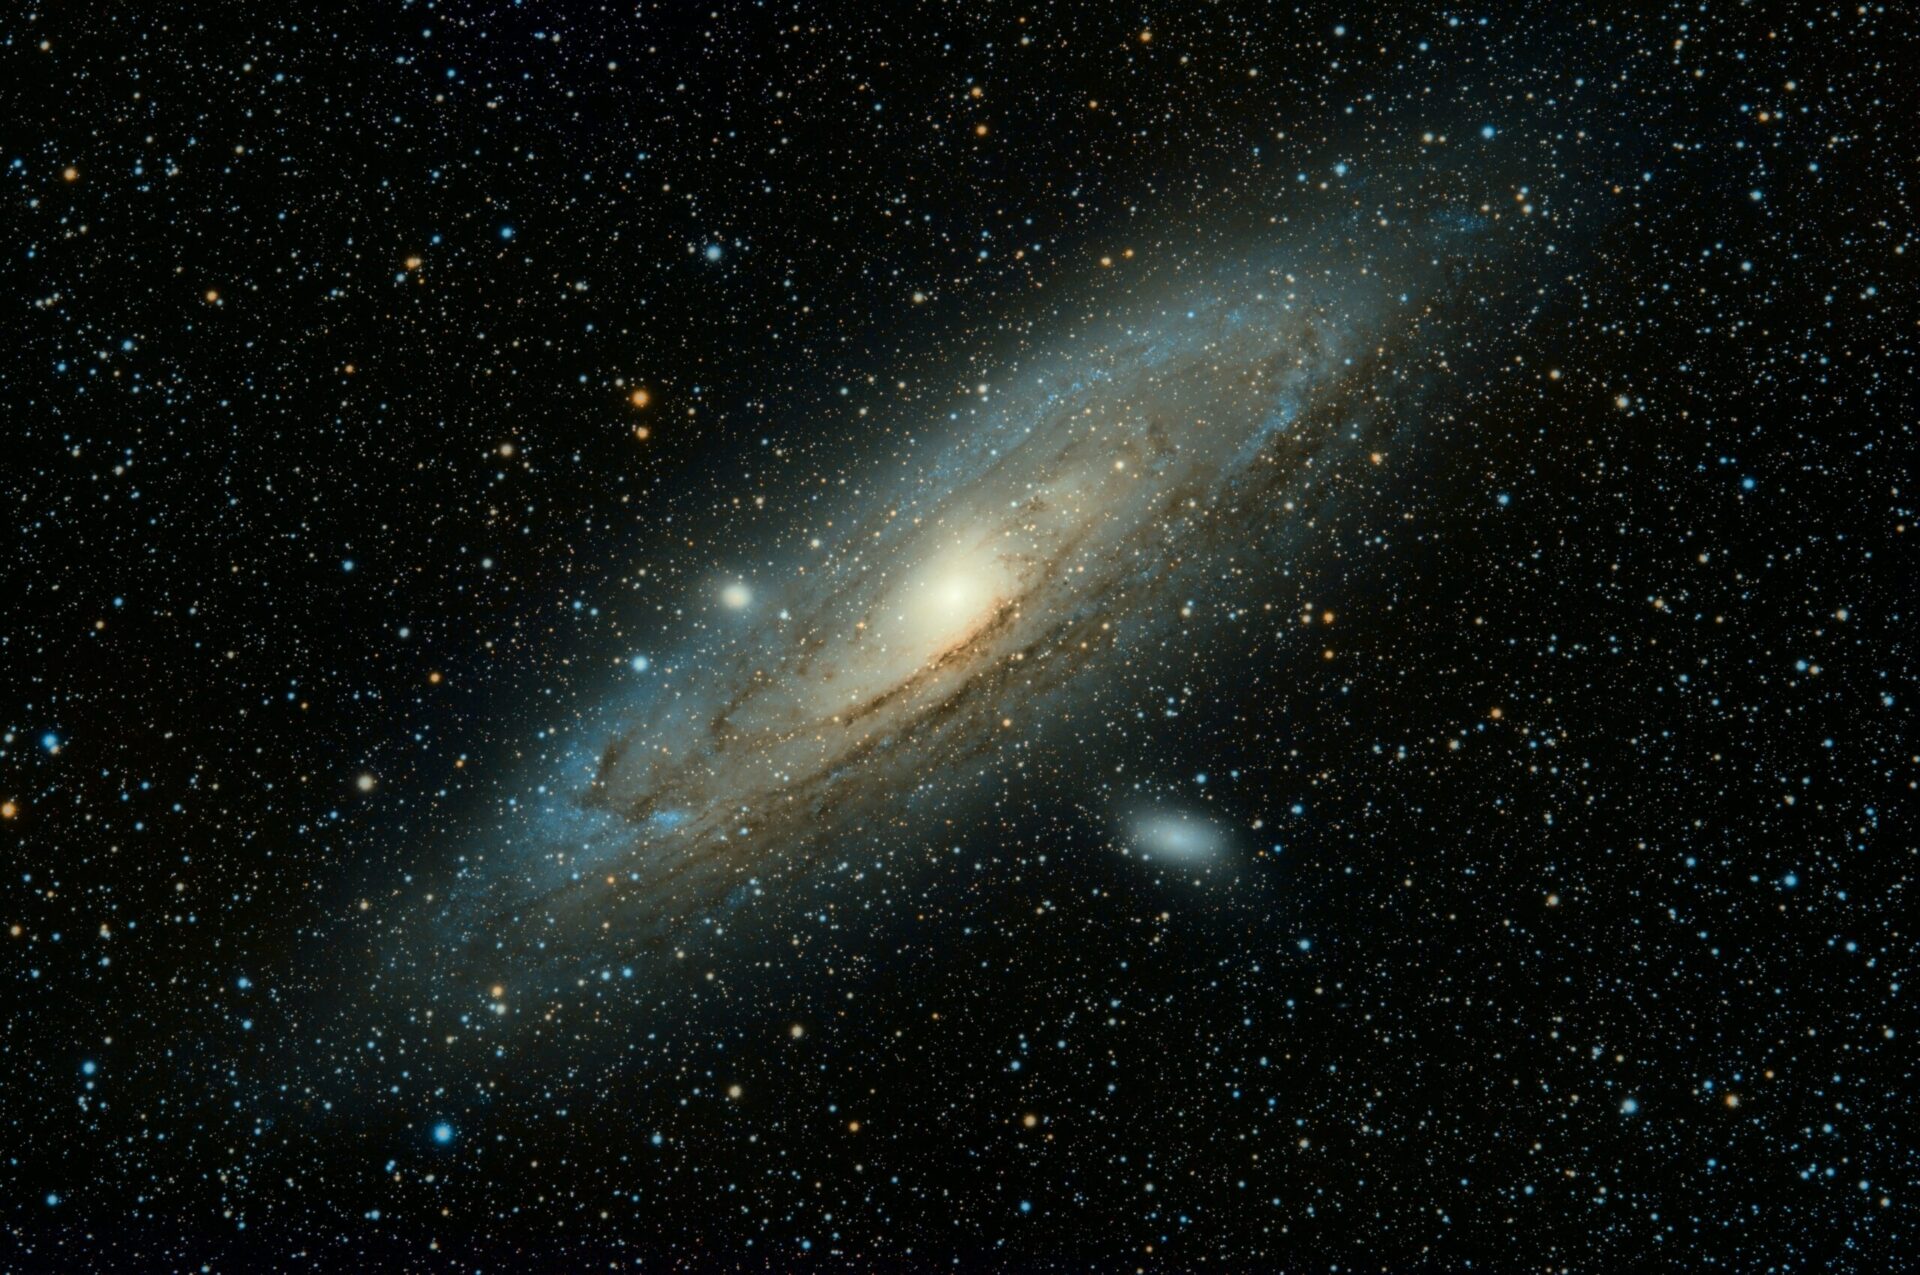 An image of an oblong galaxy in outer space.